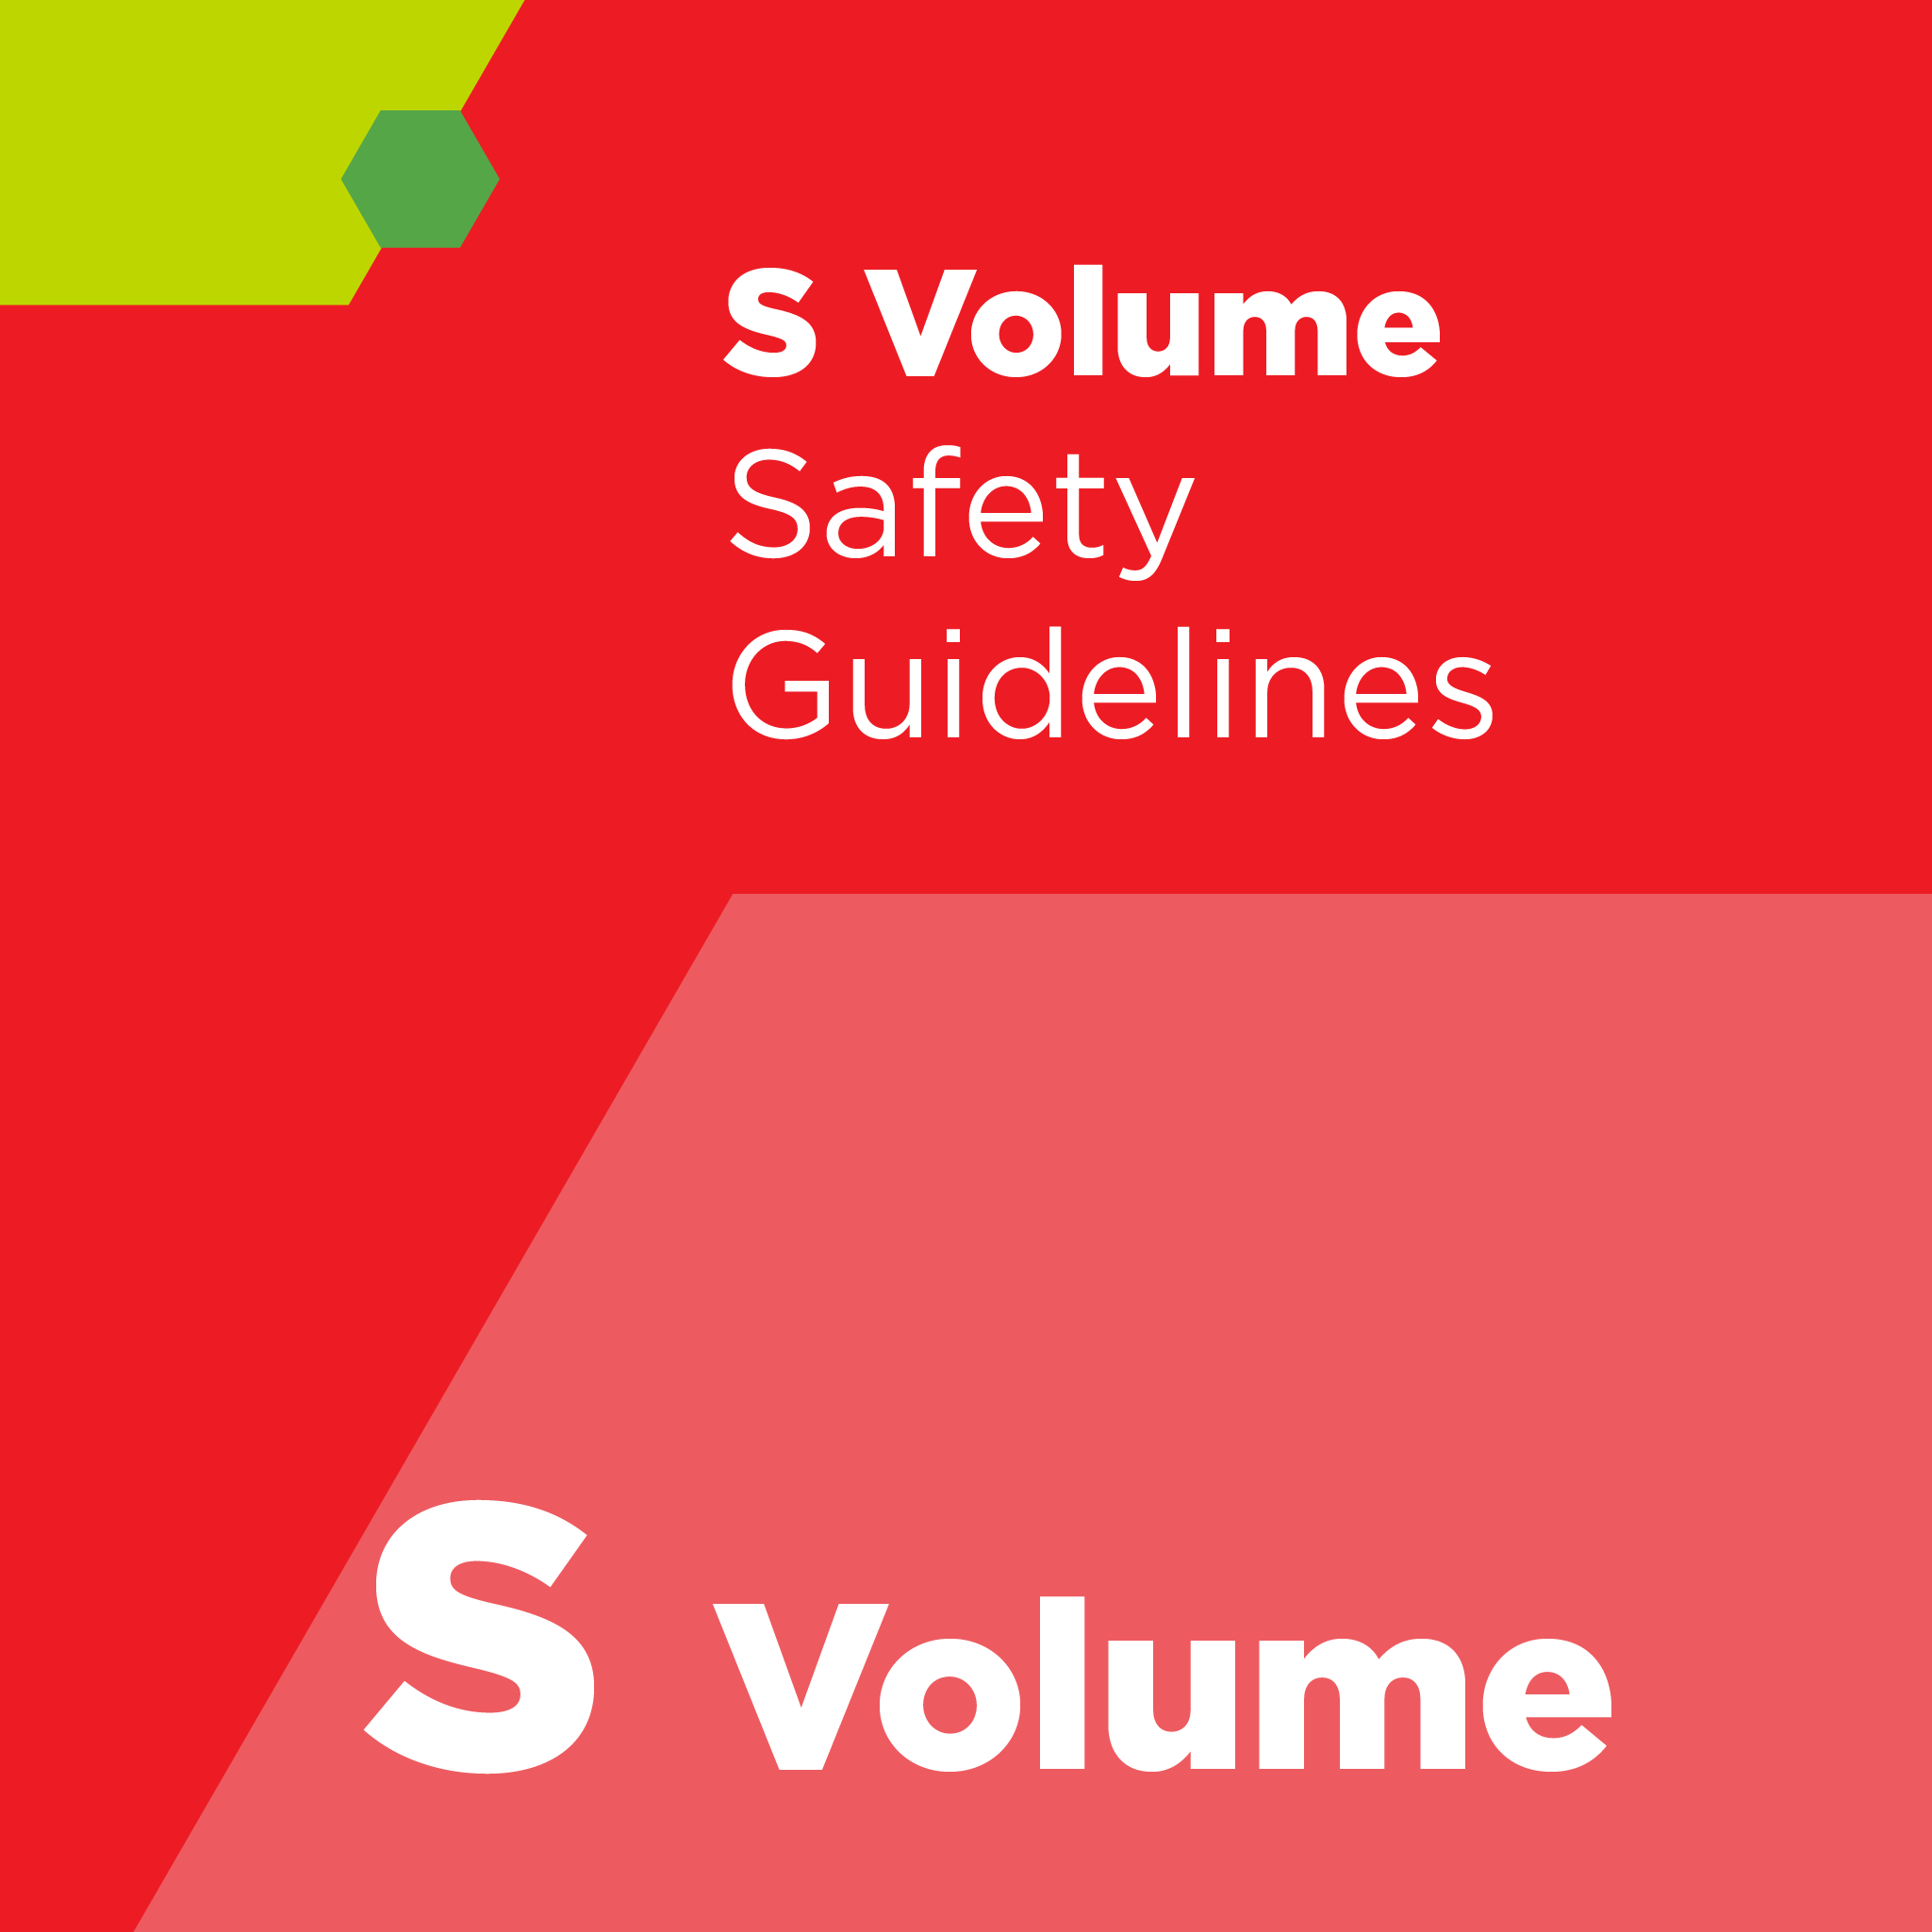 S00400 - SEMI S4 - Safety Guideline for the Segregation/Separation of Gas Cylinders Contained in Cabinets